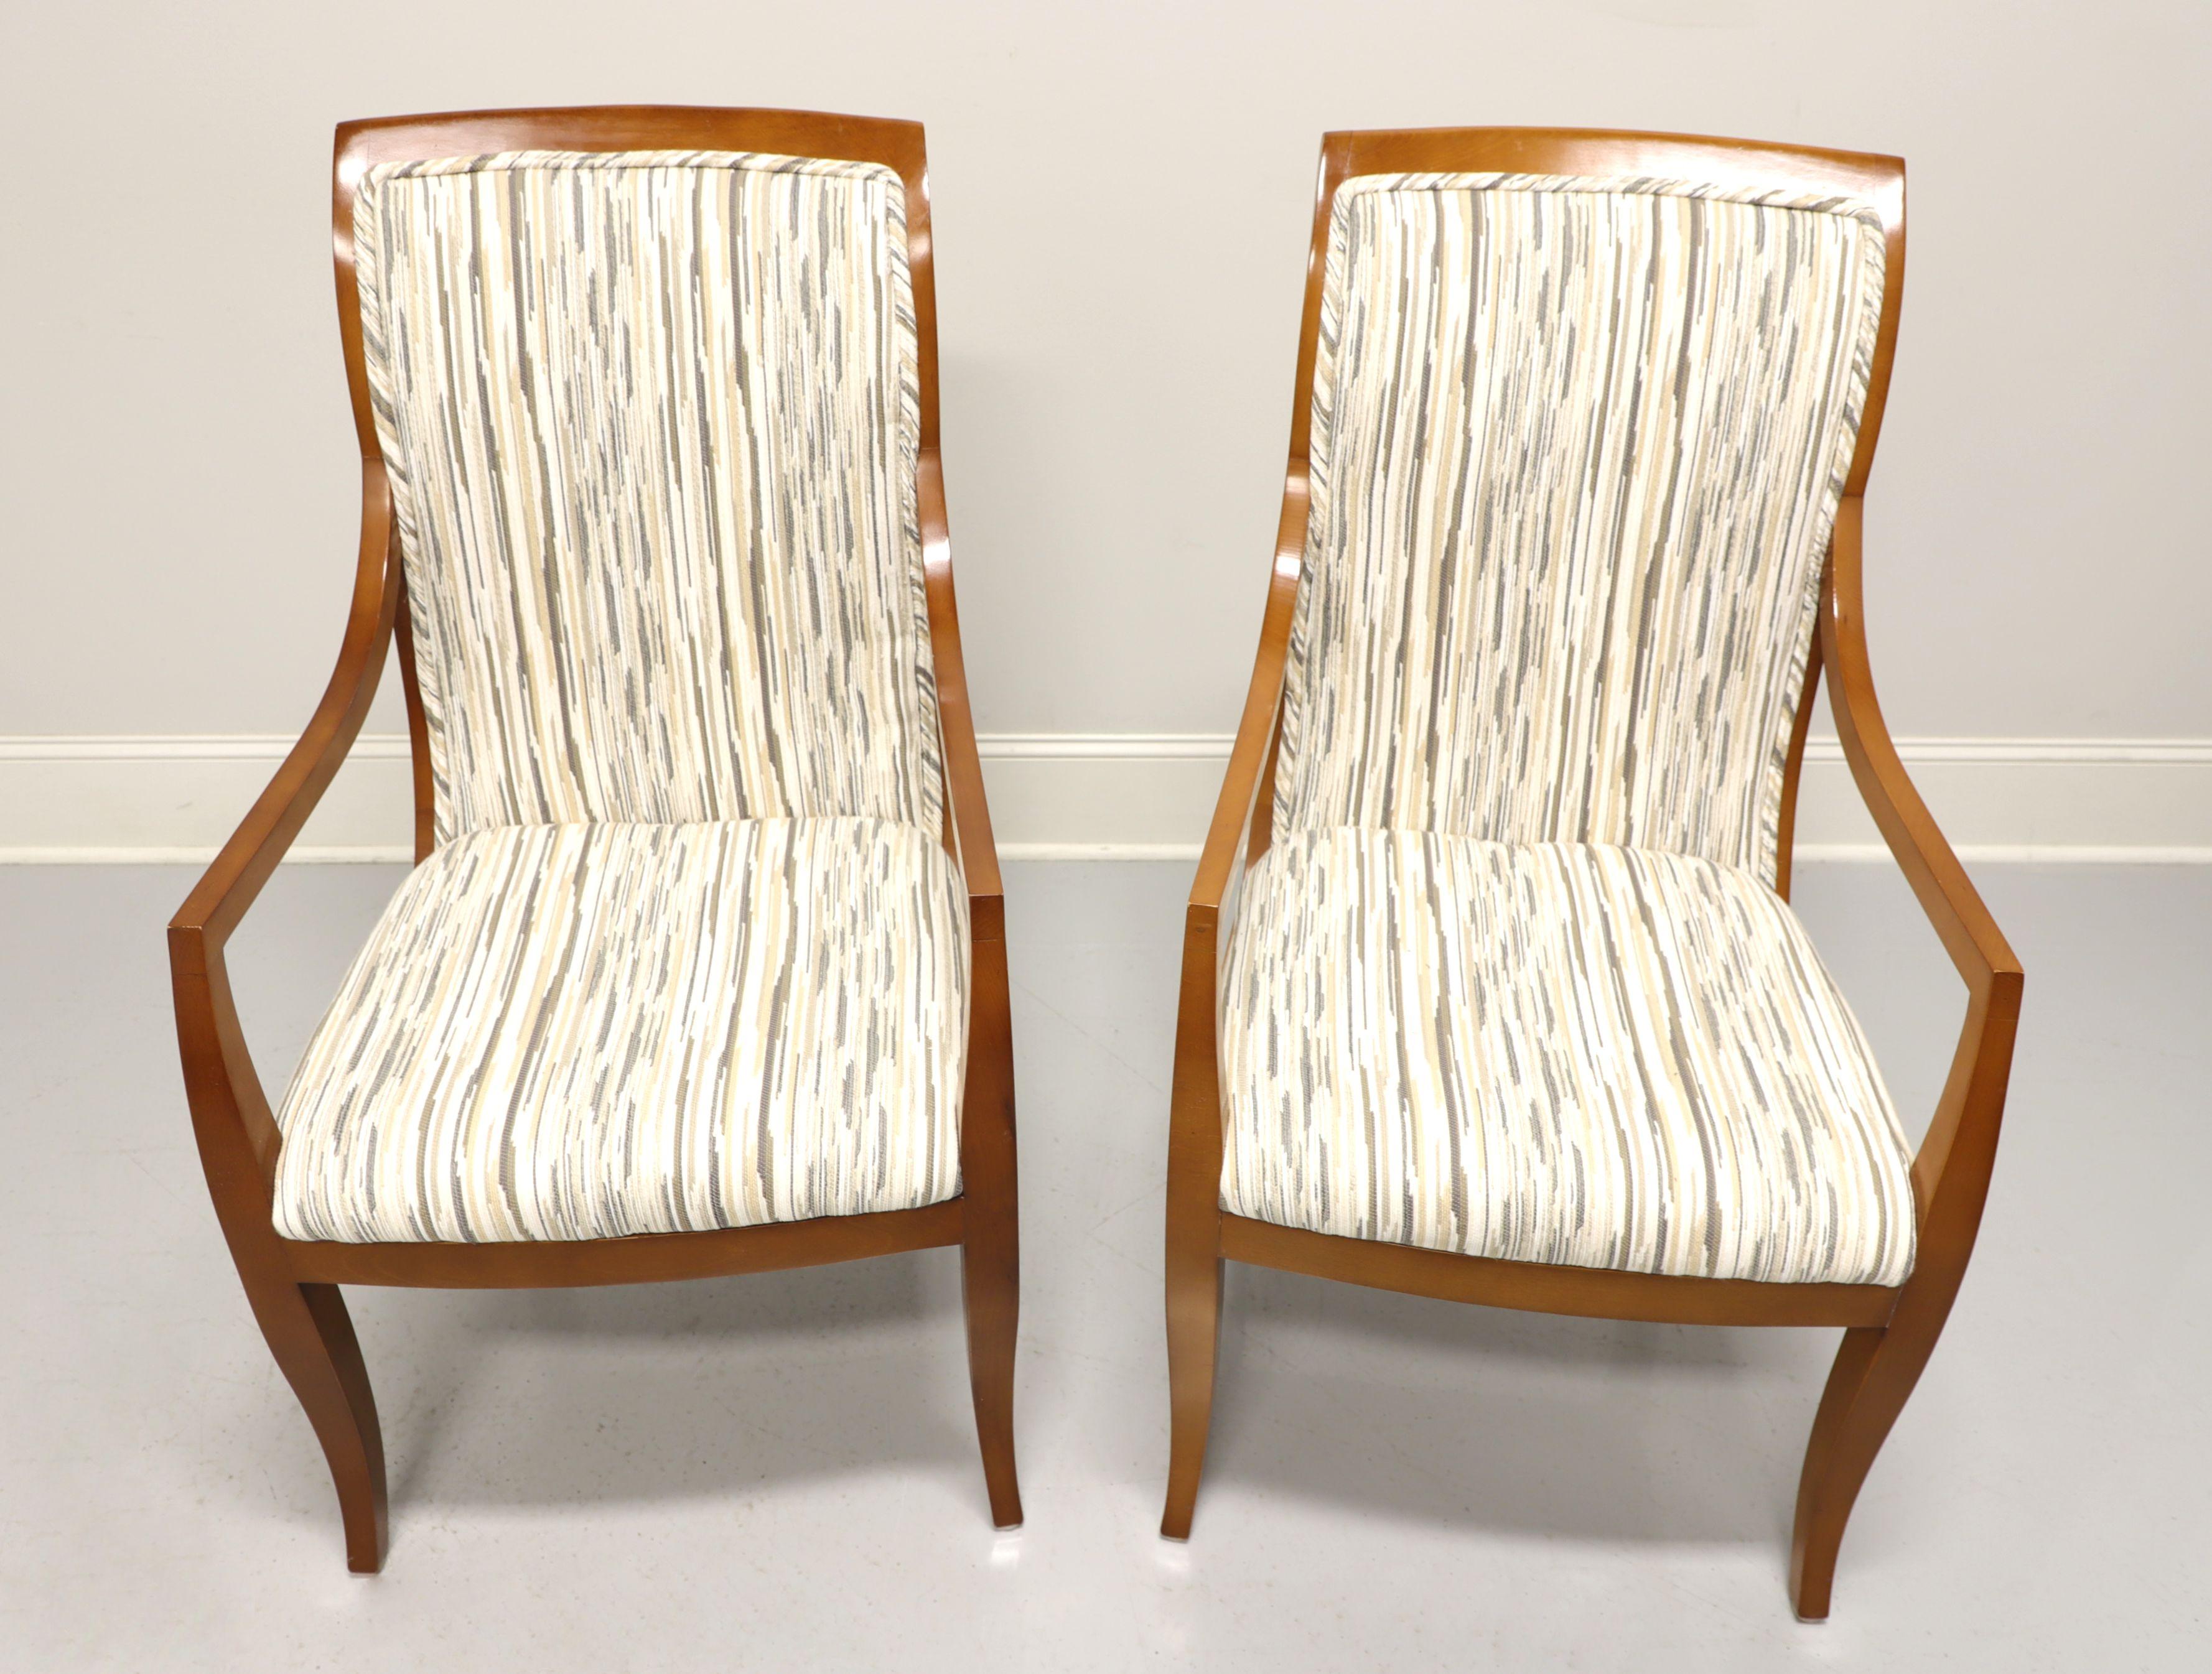 A pair of contemporary style dining armchairs by Mastercraft, a division of Baker Furniture. Solid hardwood with multi-color neutral pattern fabric upholstered backs and seat. Tall rectangular shaped backs, gently sloped arms and saber legs. Made in